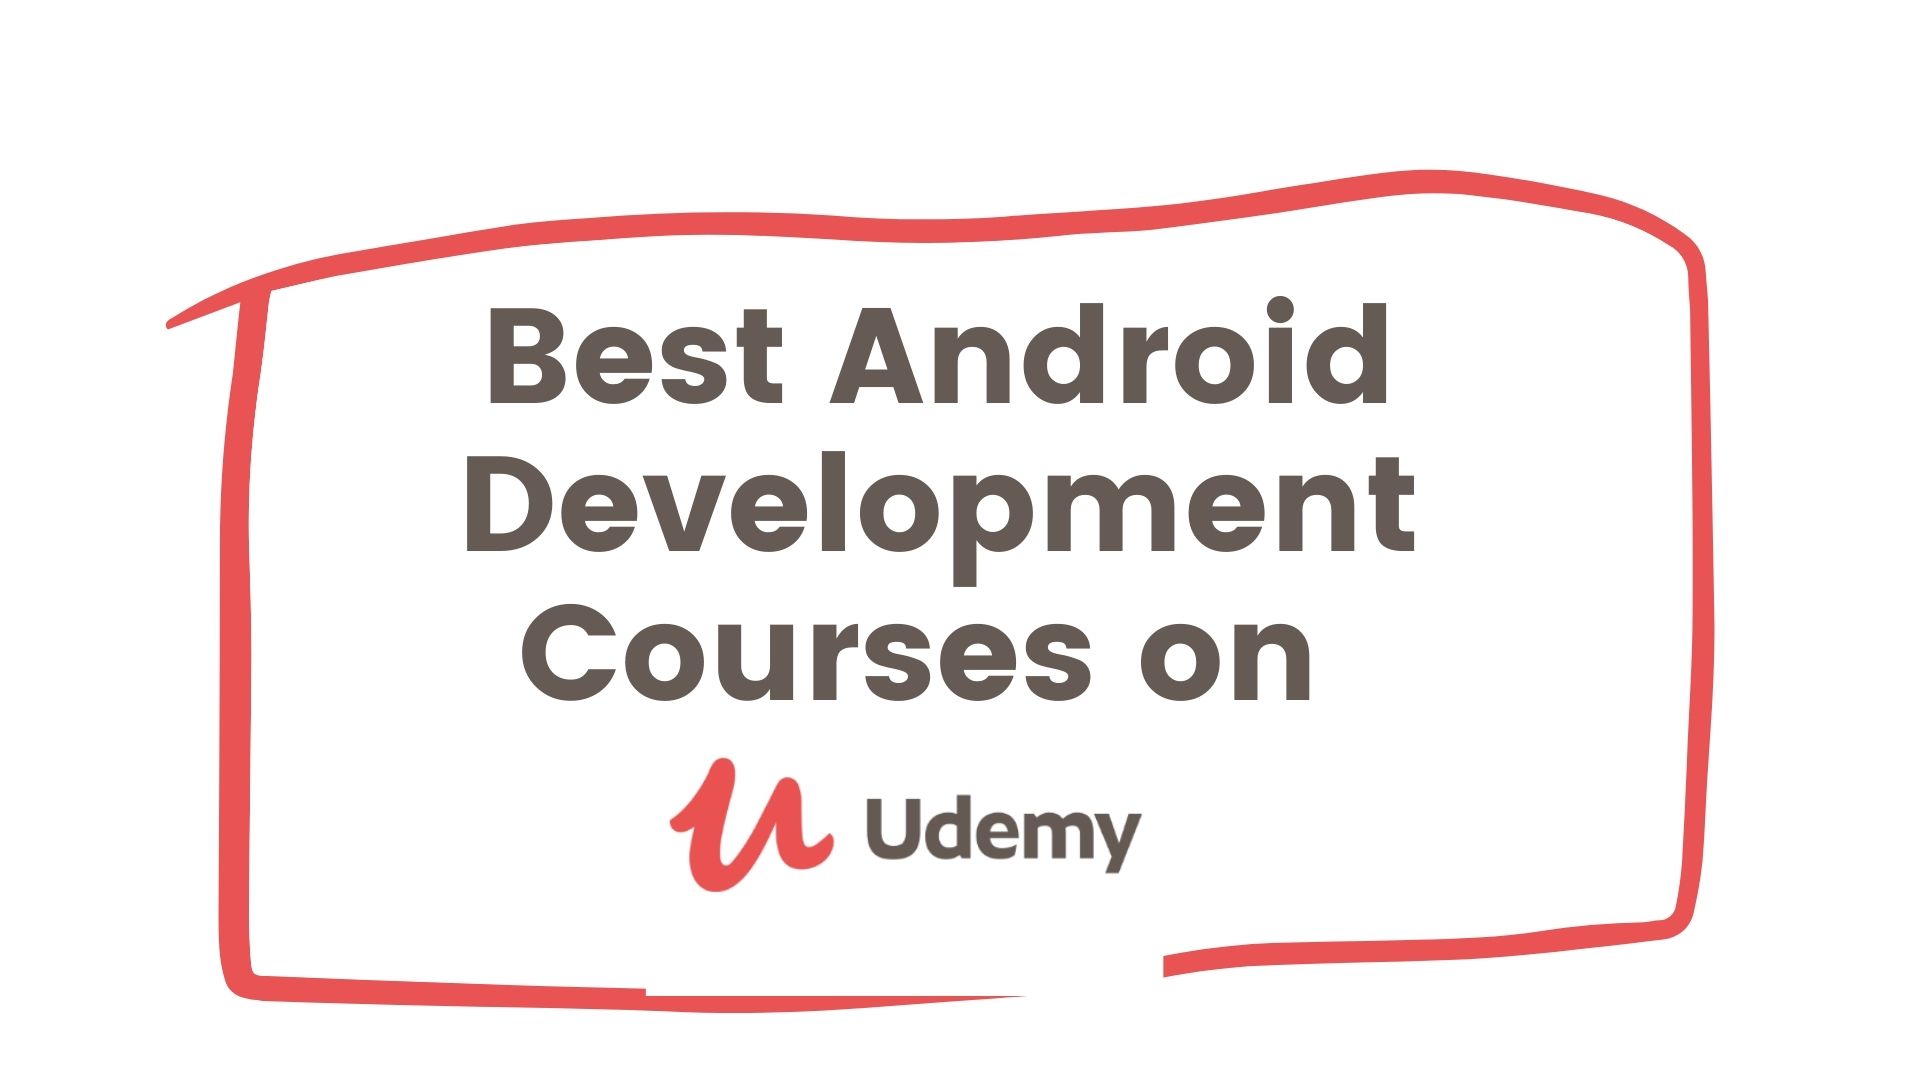 Top 55 Best Android Development Courses on Udemy